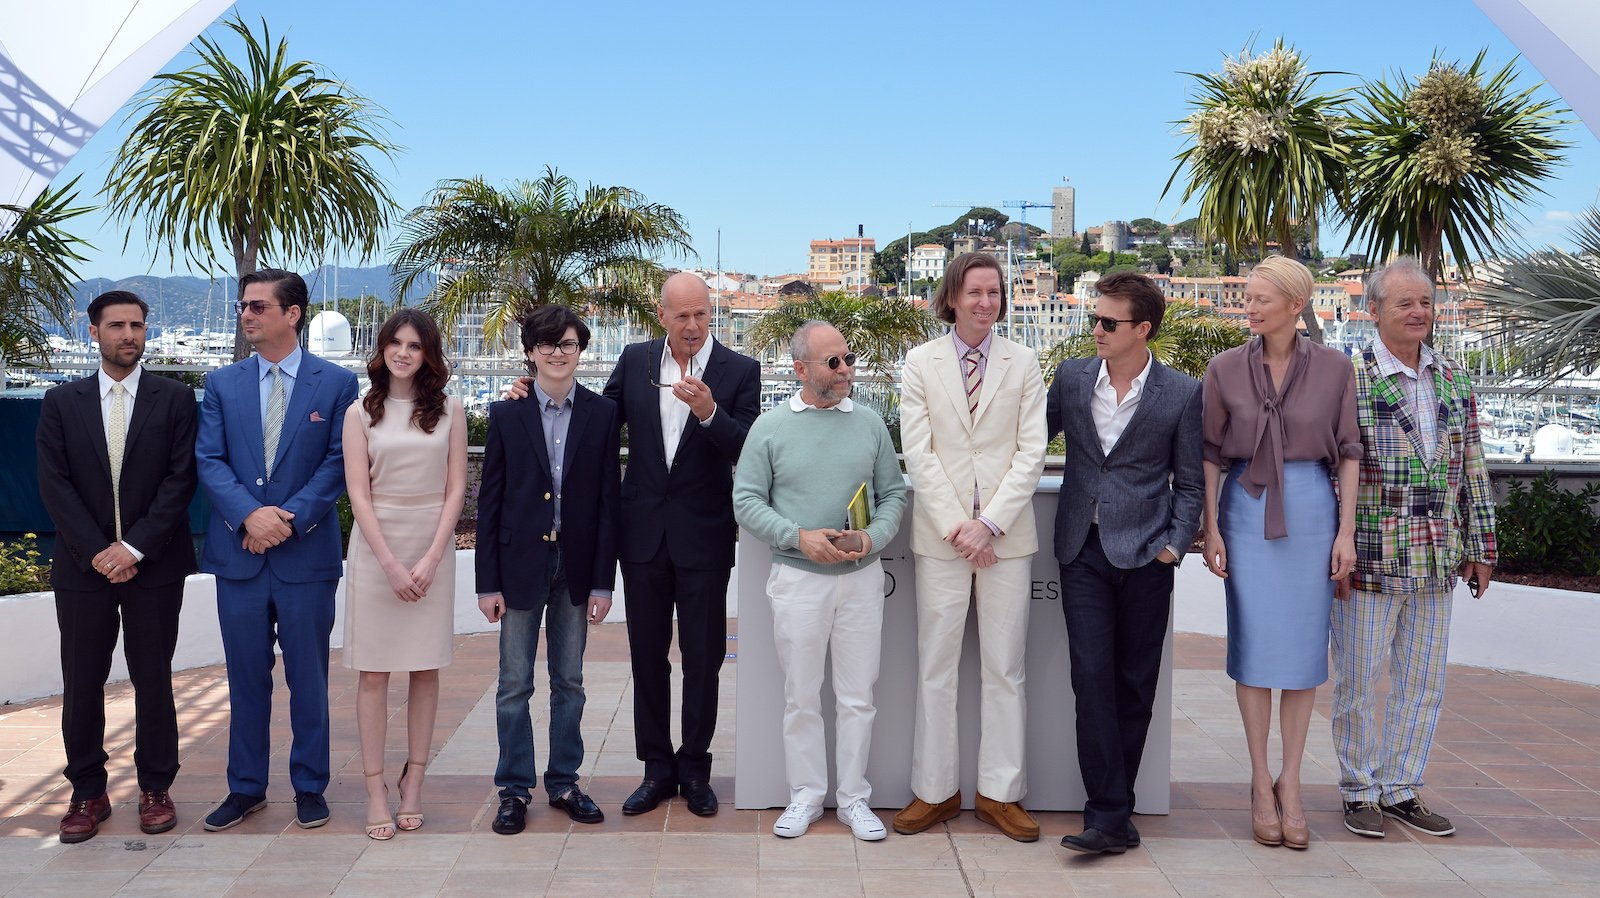 Wes Anderson and Moonrise Kingdom cast during 65th Cannes film festival